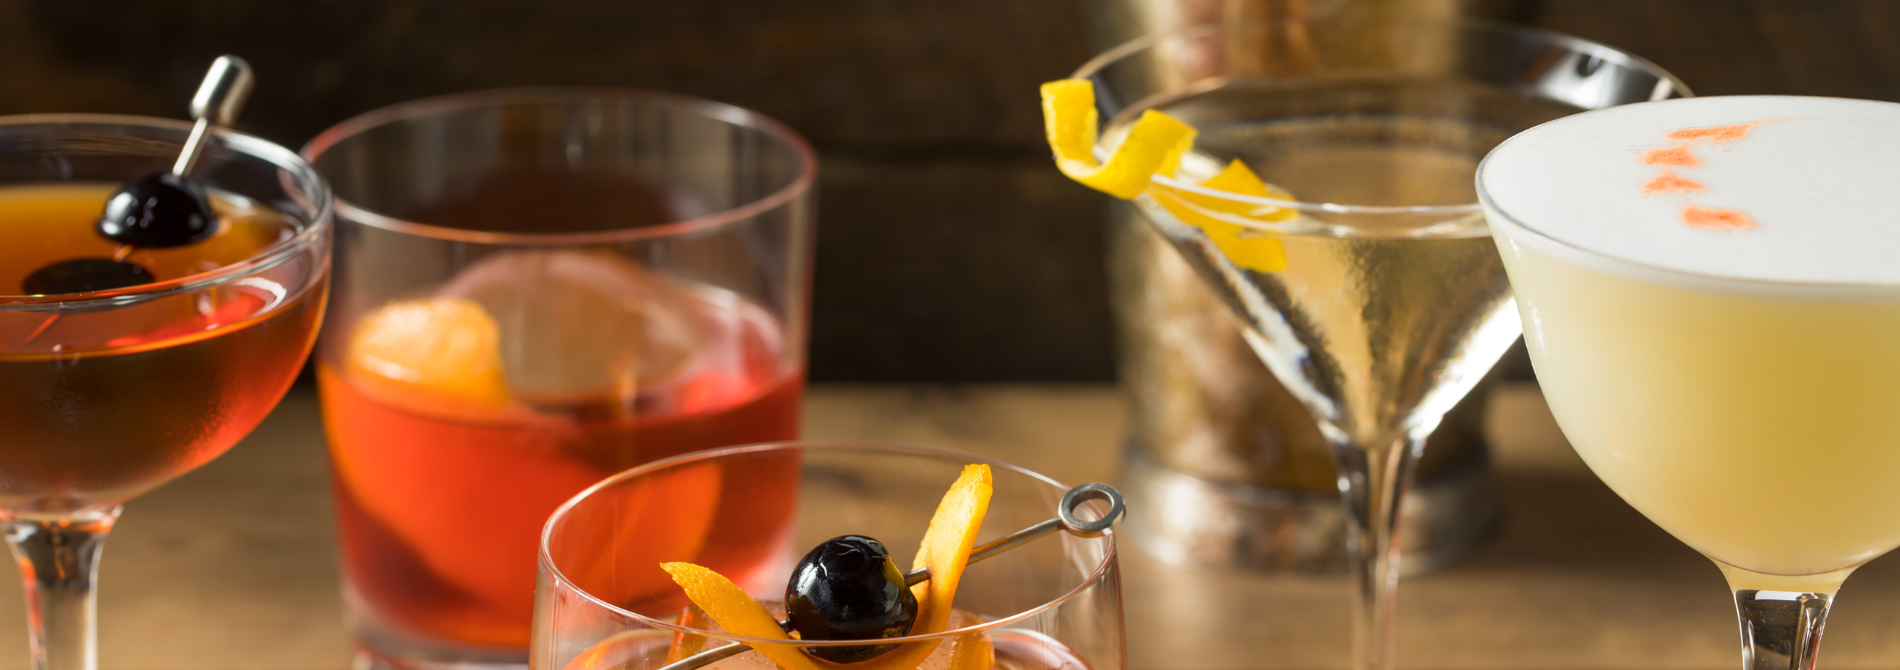 The Ultimate Starter Mixlist: Four Classic Cocktails to Master for Any Newbie Home Bartender!